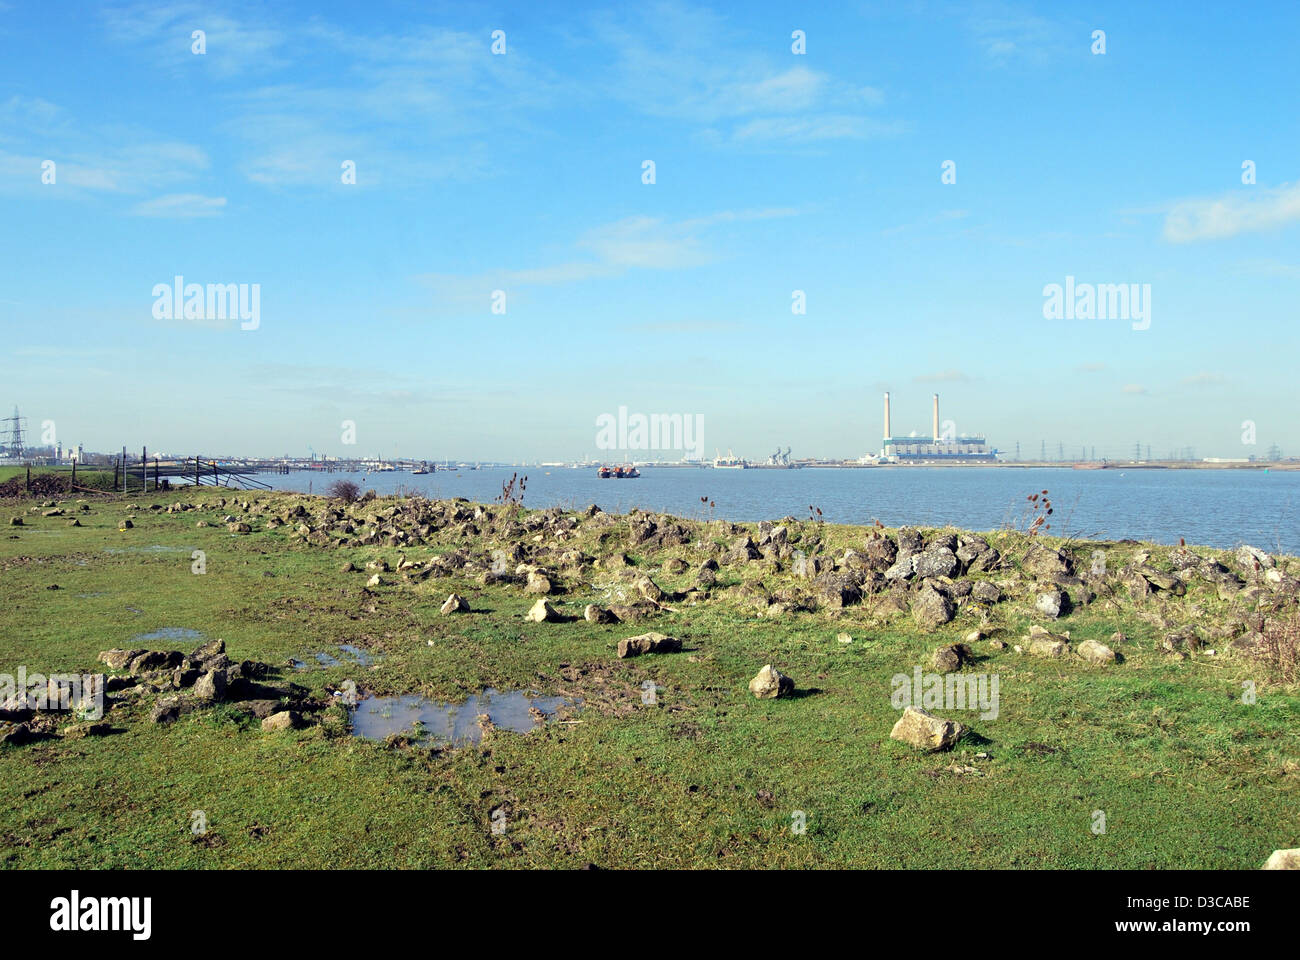 A  view of the River Thames from Gravesend in Kent showing Tilbury power station and rocks in a flooded field in the foreground. Stock Photo